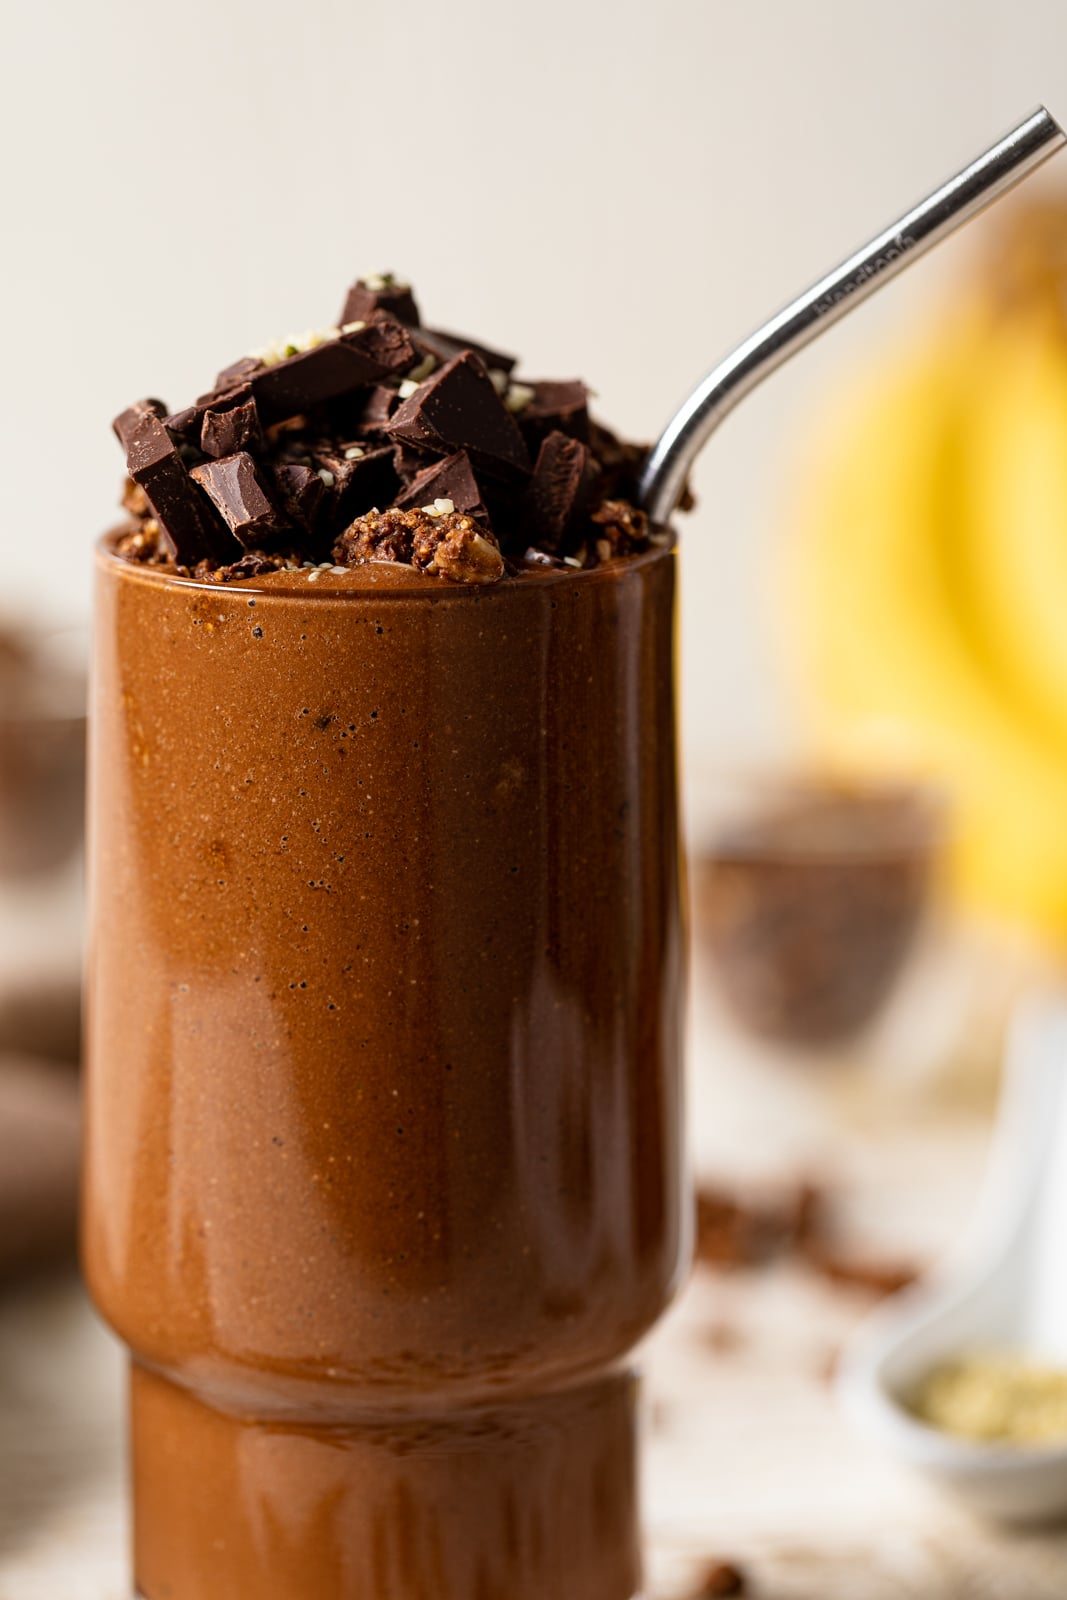 Closeup of a Chocolate Banana Smoothie with Espresso topped with chocolate pieces